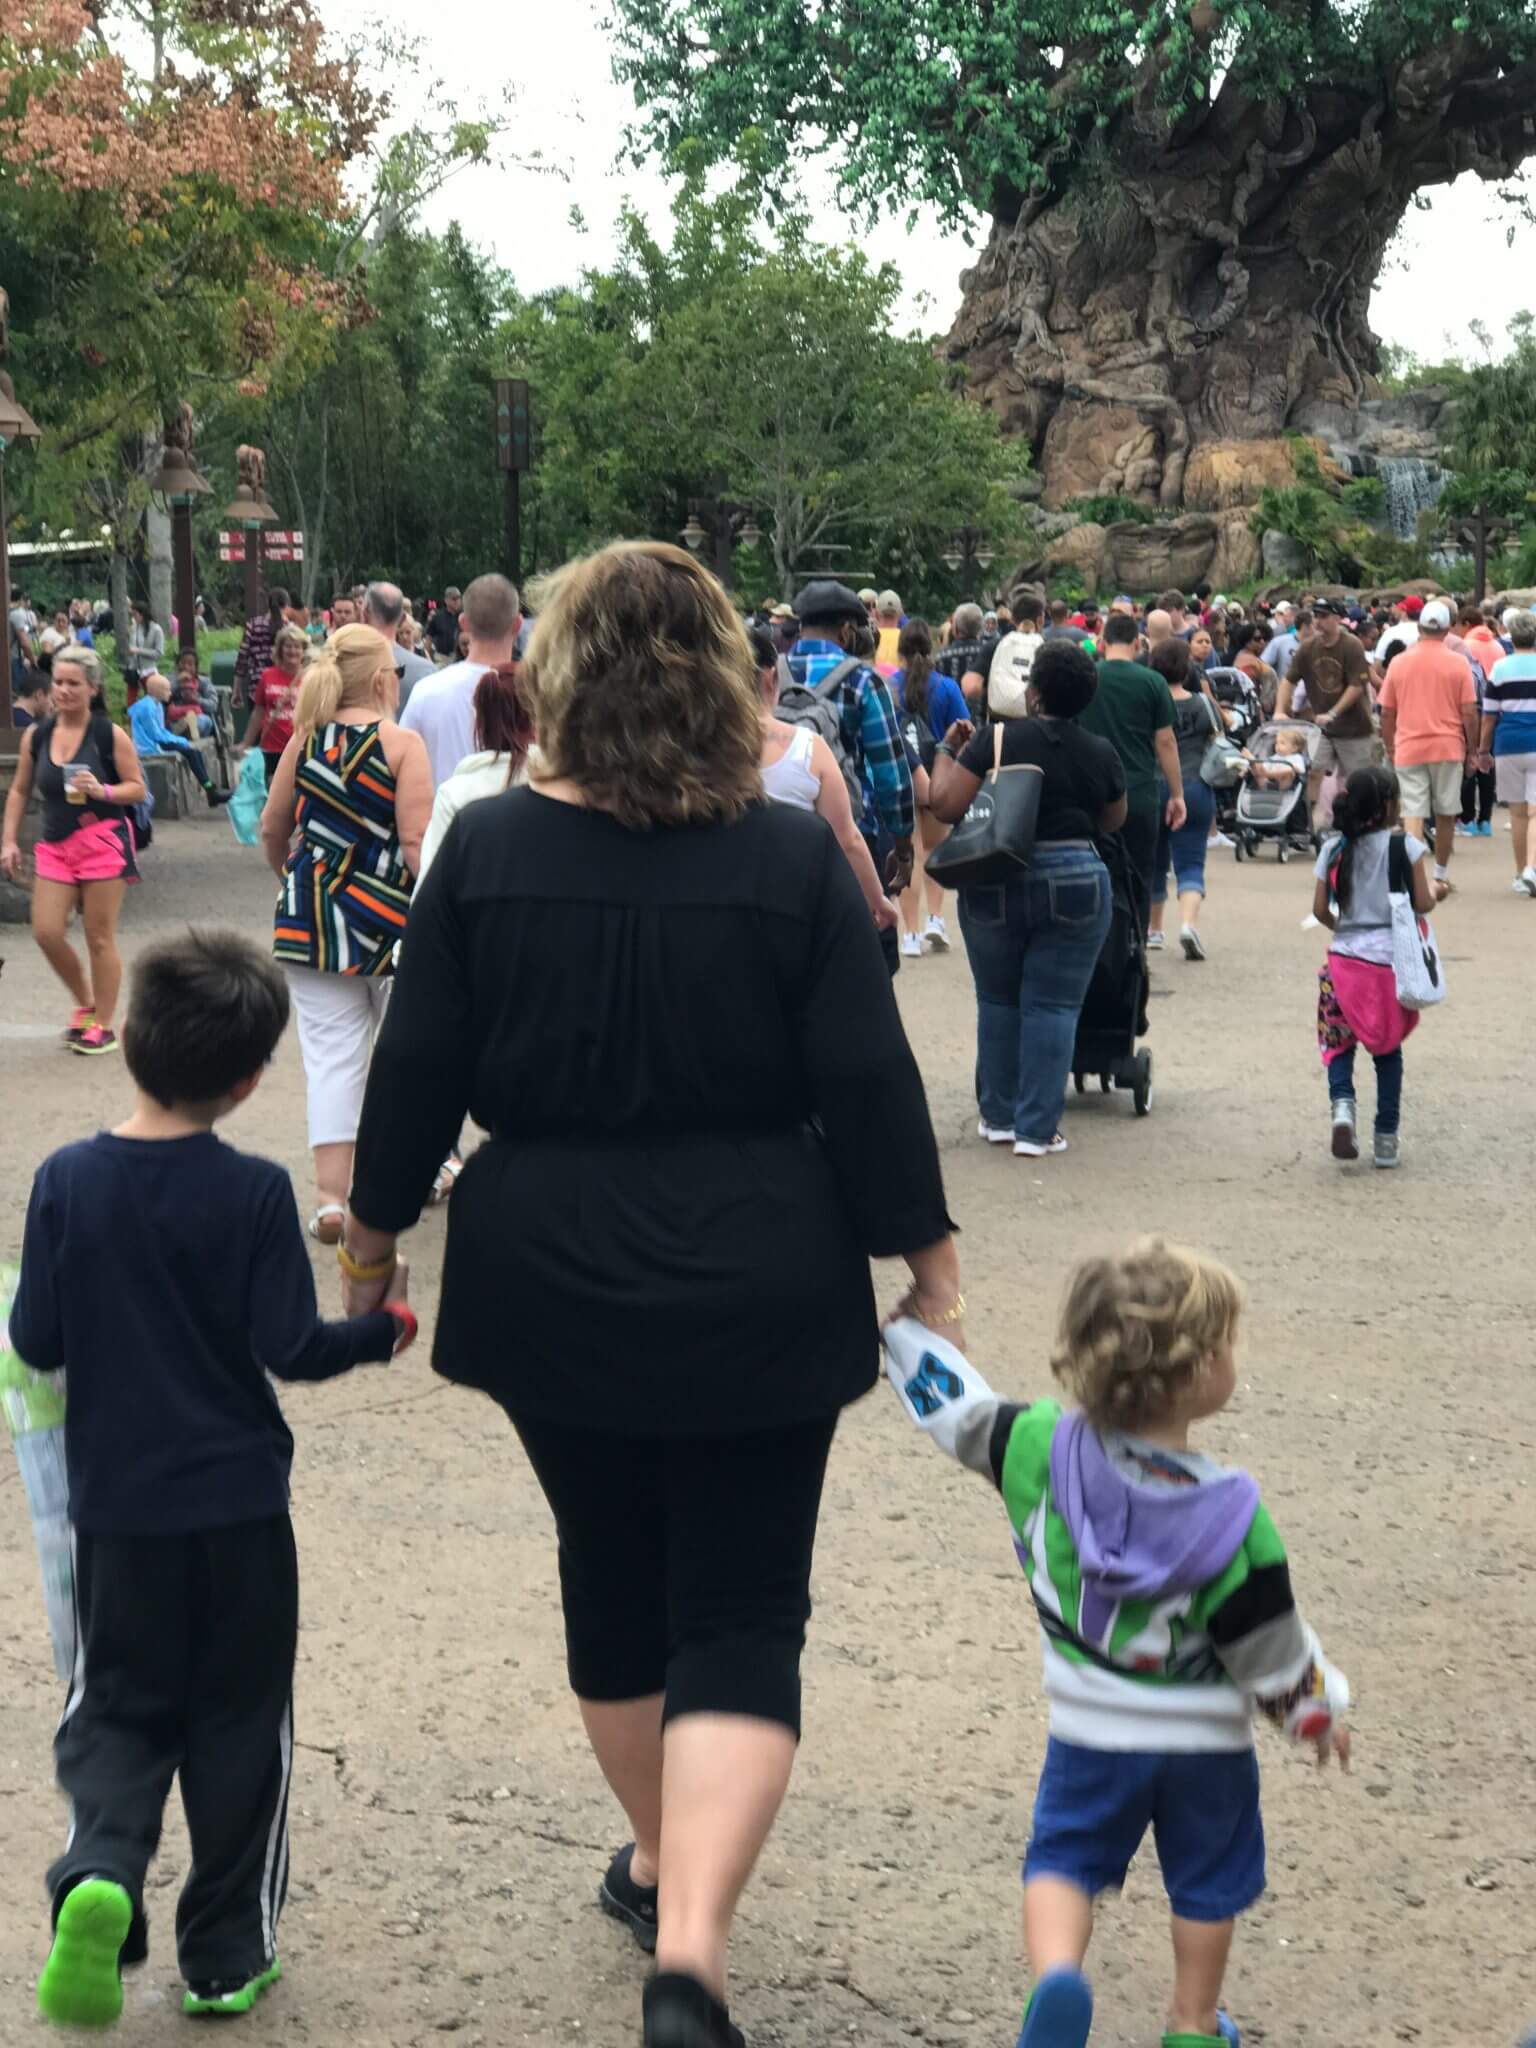 Traveling with Extended Family to Animal Kingdom. Tips for keeping the Peace while on vacation to Disney. www.HuntingforRubies.com